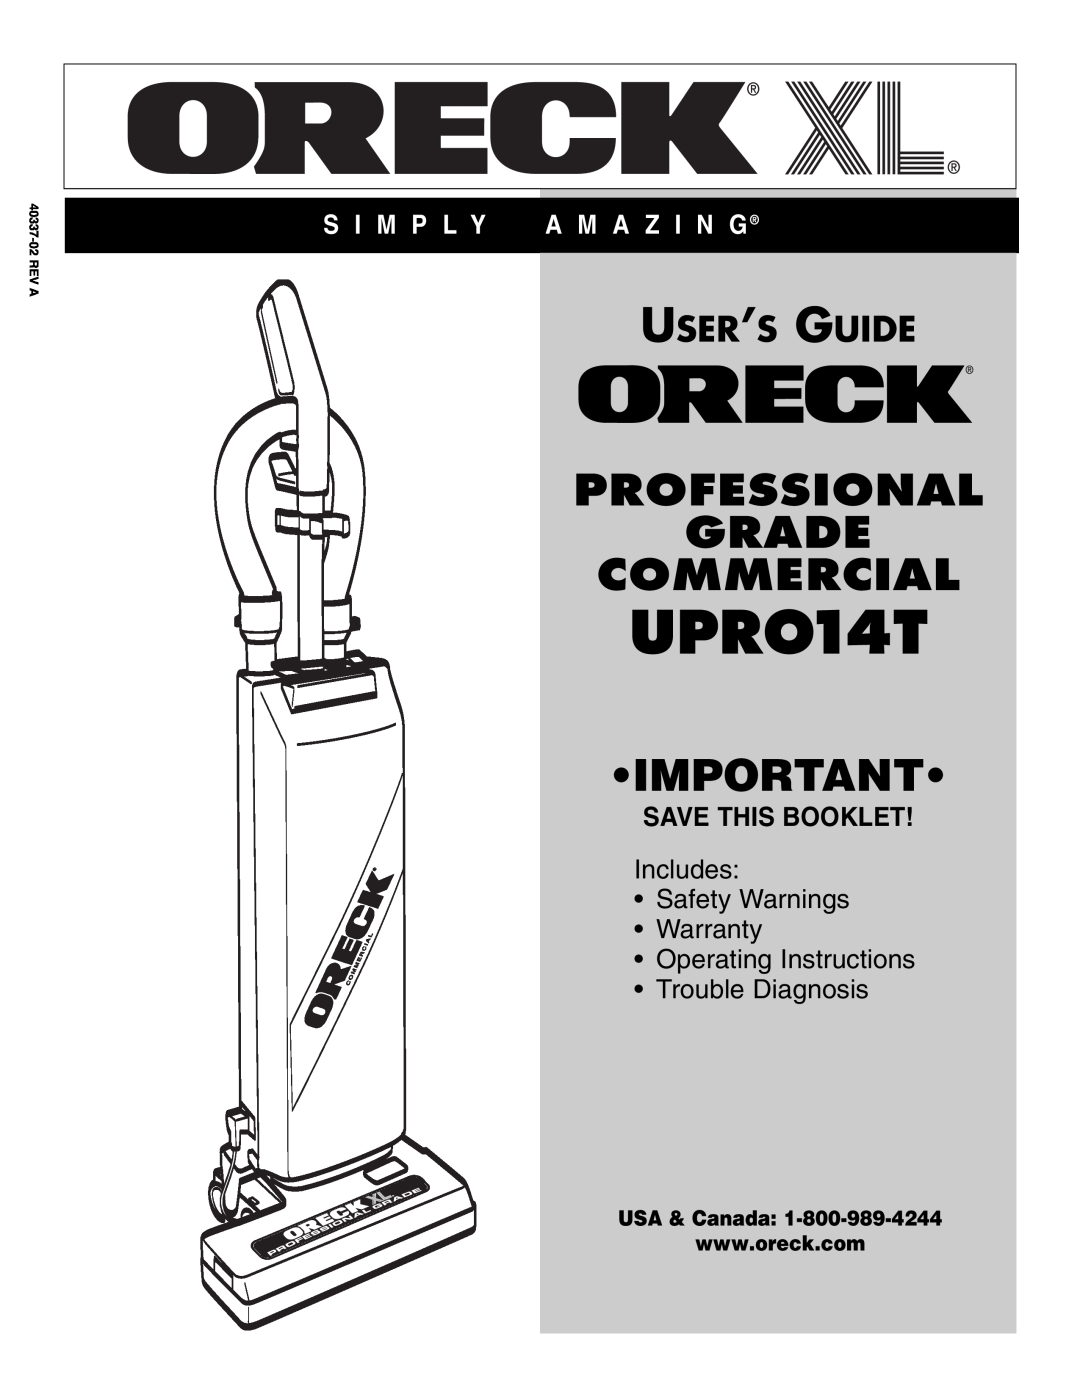 Oreck UPRO14T warranty Save This Booklet, Professional Grade Commercial, User’S Guide, S I M P L Y A M A Z I N G 